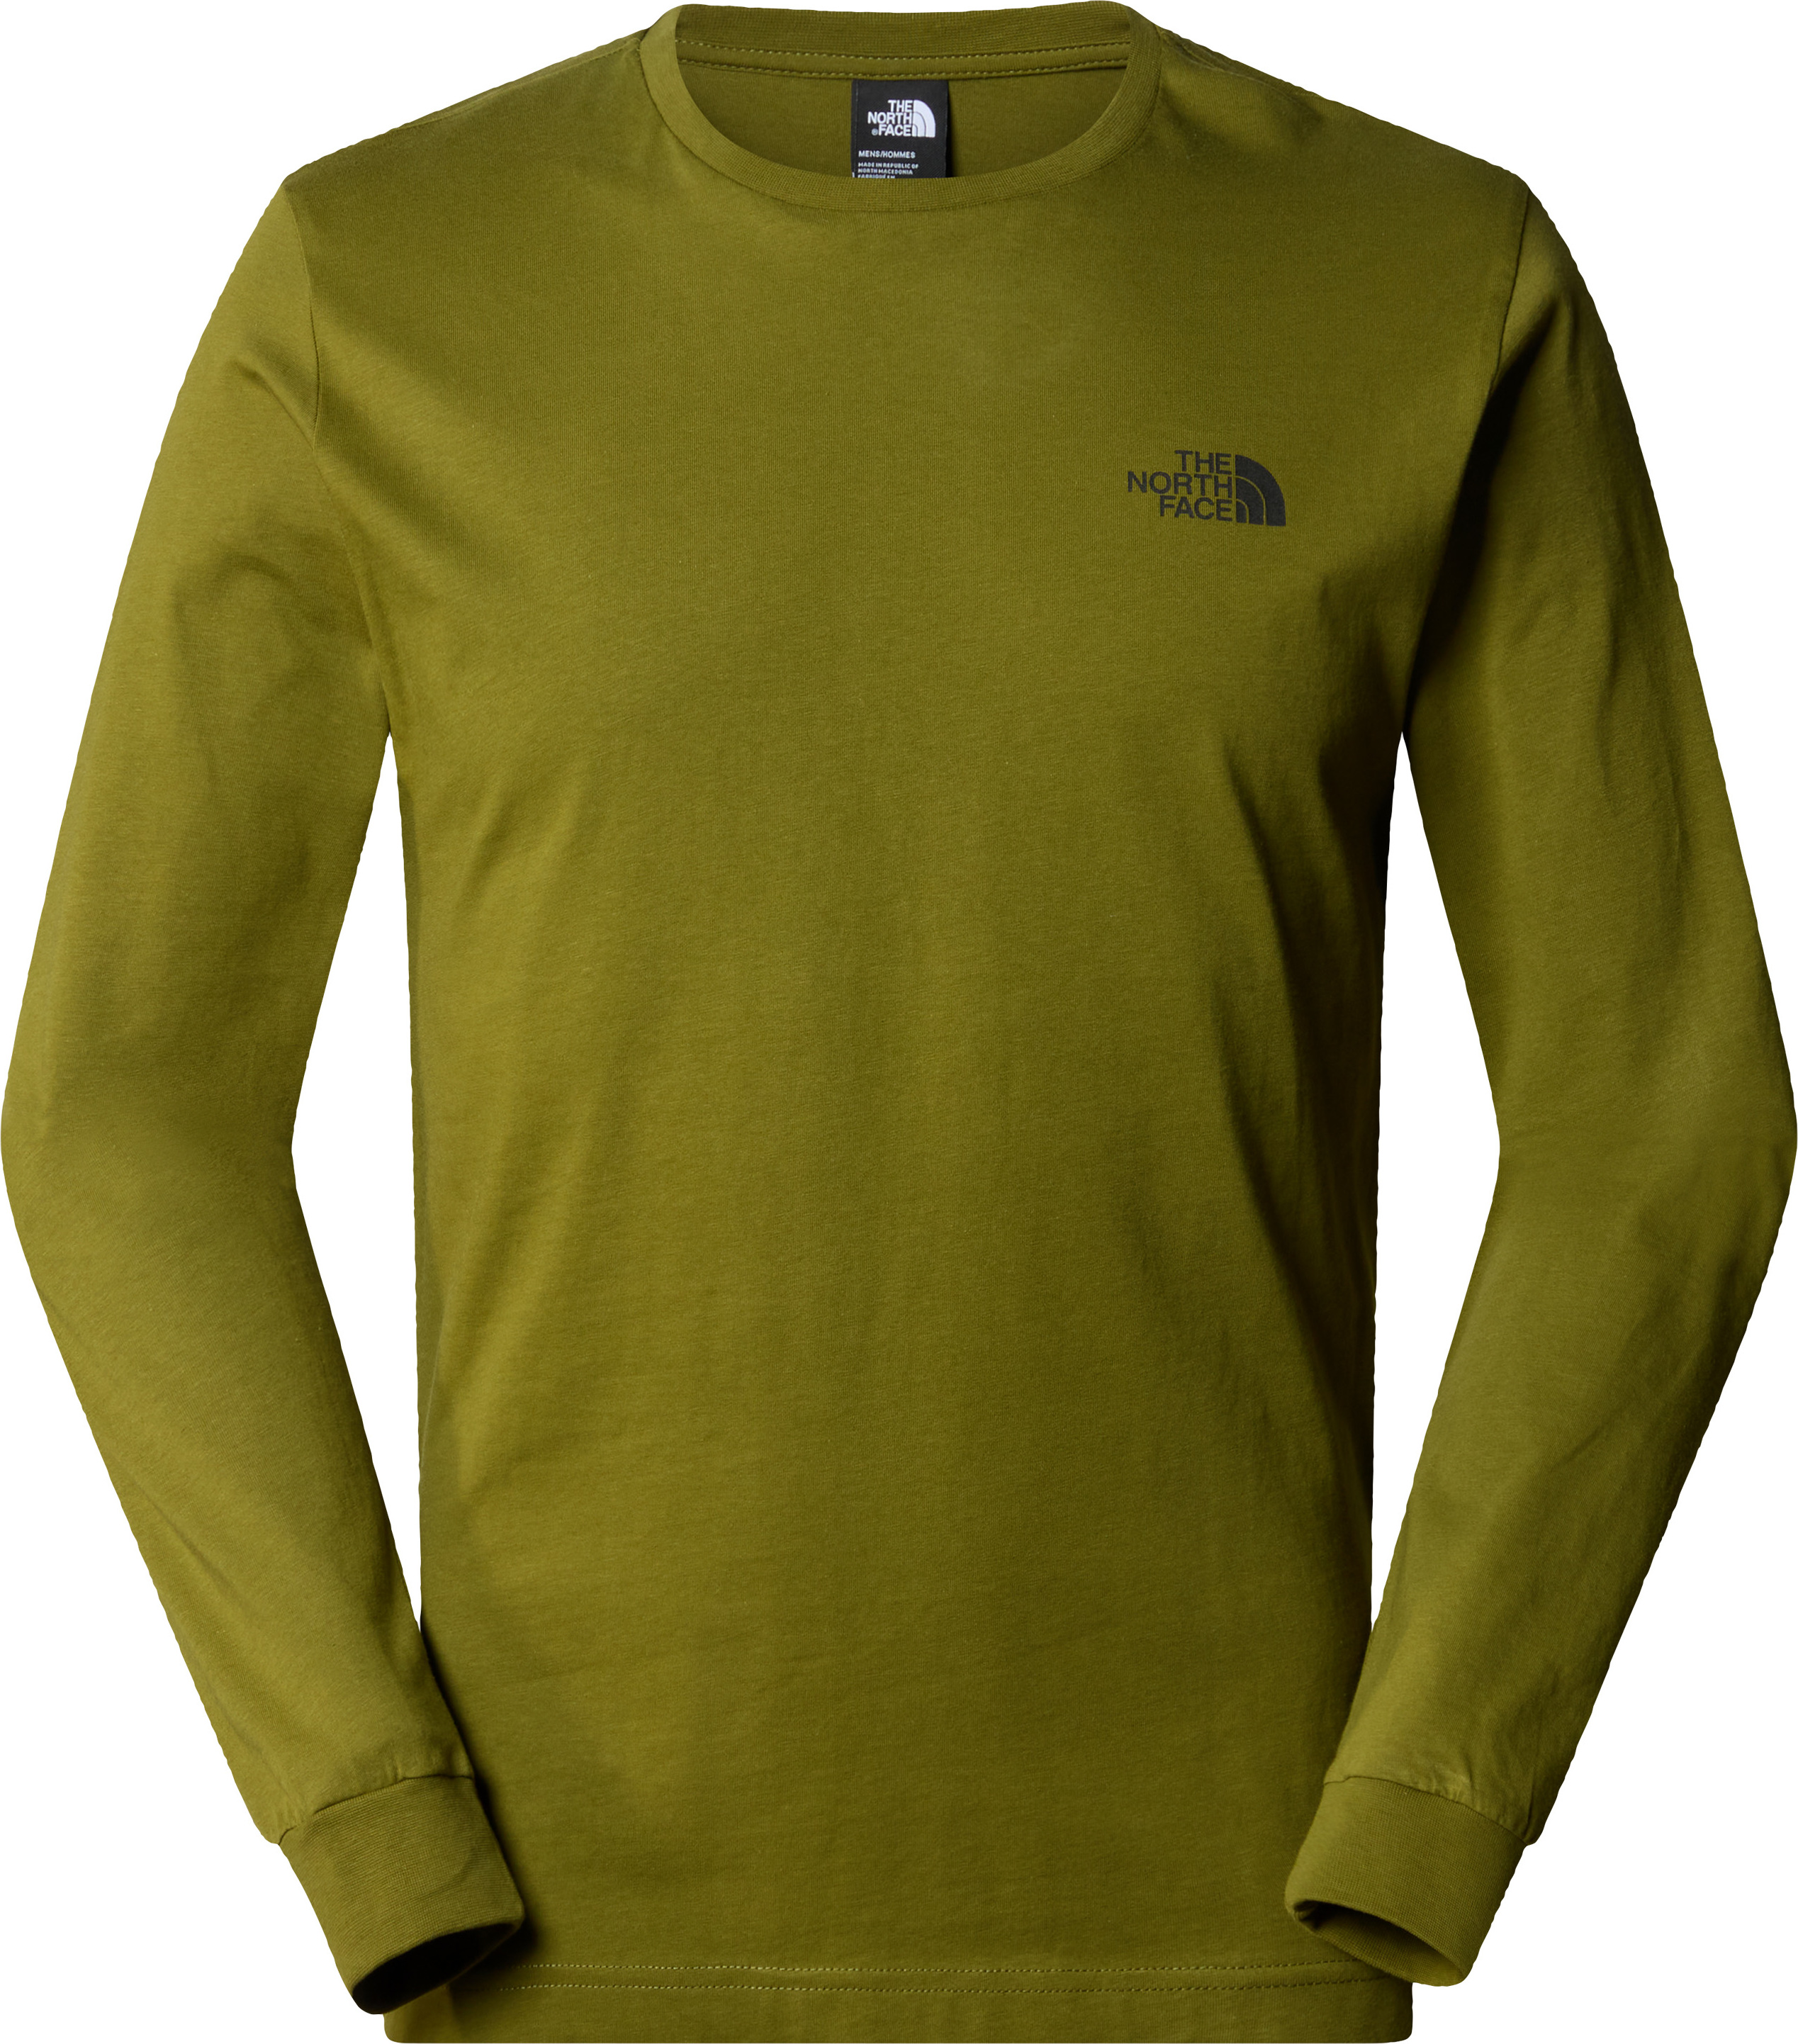 https://www.fjellsport.no/assets/blobs/the-north-face-m-l-s-easy-tee%20(2)-08c59d42df.jpeg